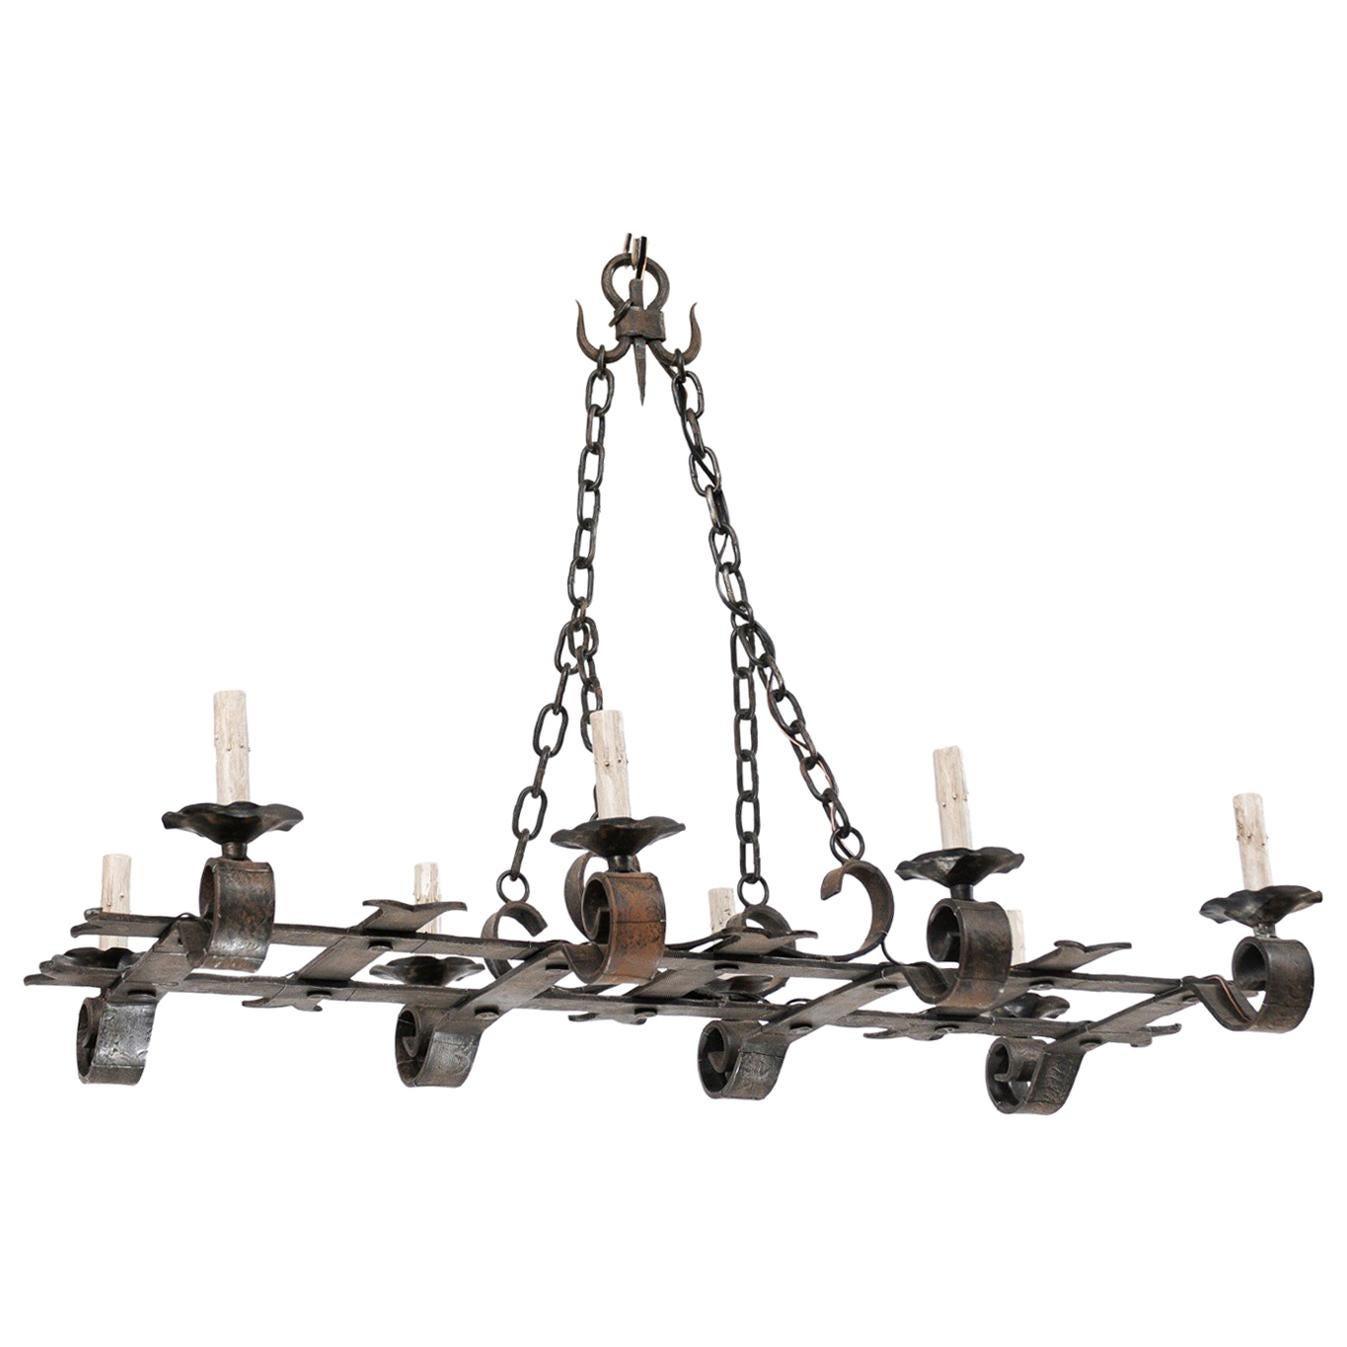 French Forged-Iron Eight-Light Chandelier in Rectangular Shape, Mid-20th Century